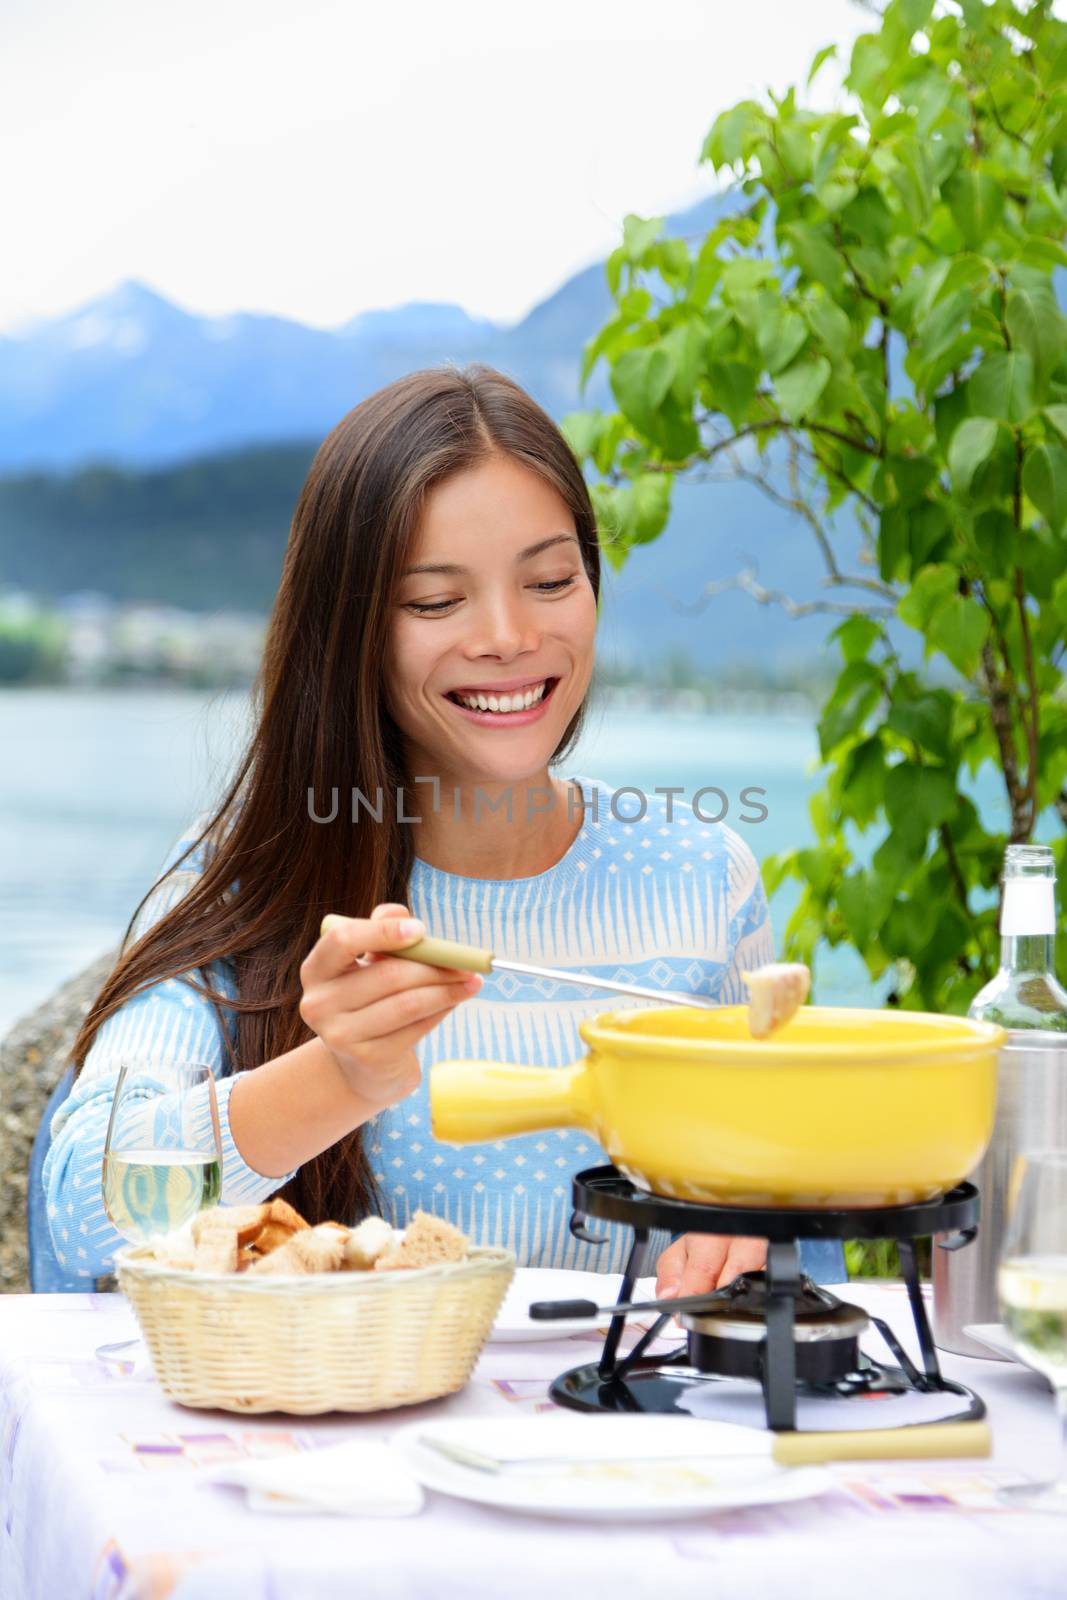 Cheese fondue - woman eating local Swiss food. People eating traditional food from Switzerland having fun by lake in the Alps on travel in Europe.